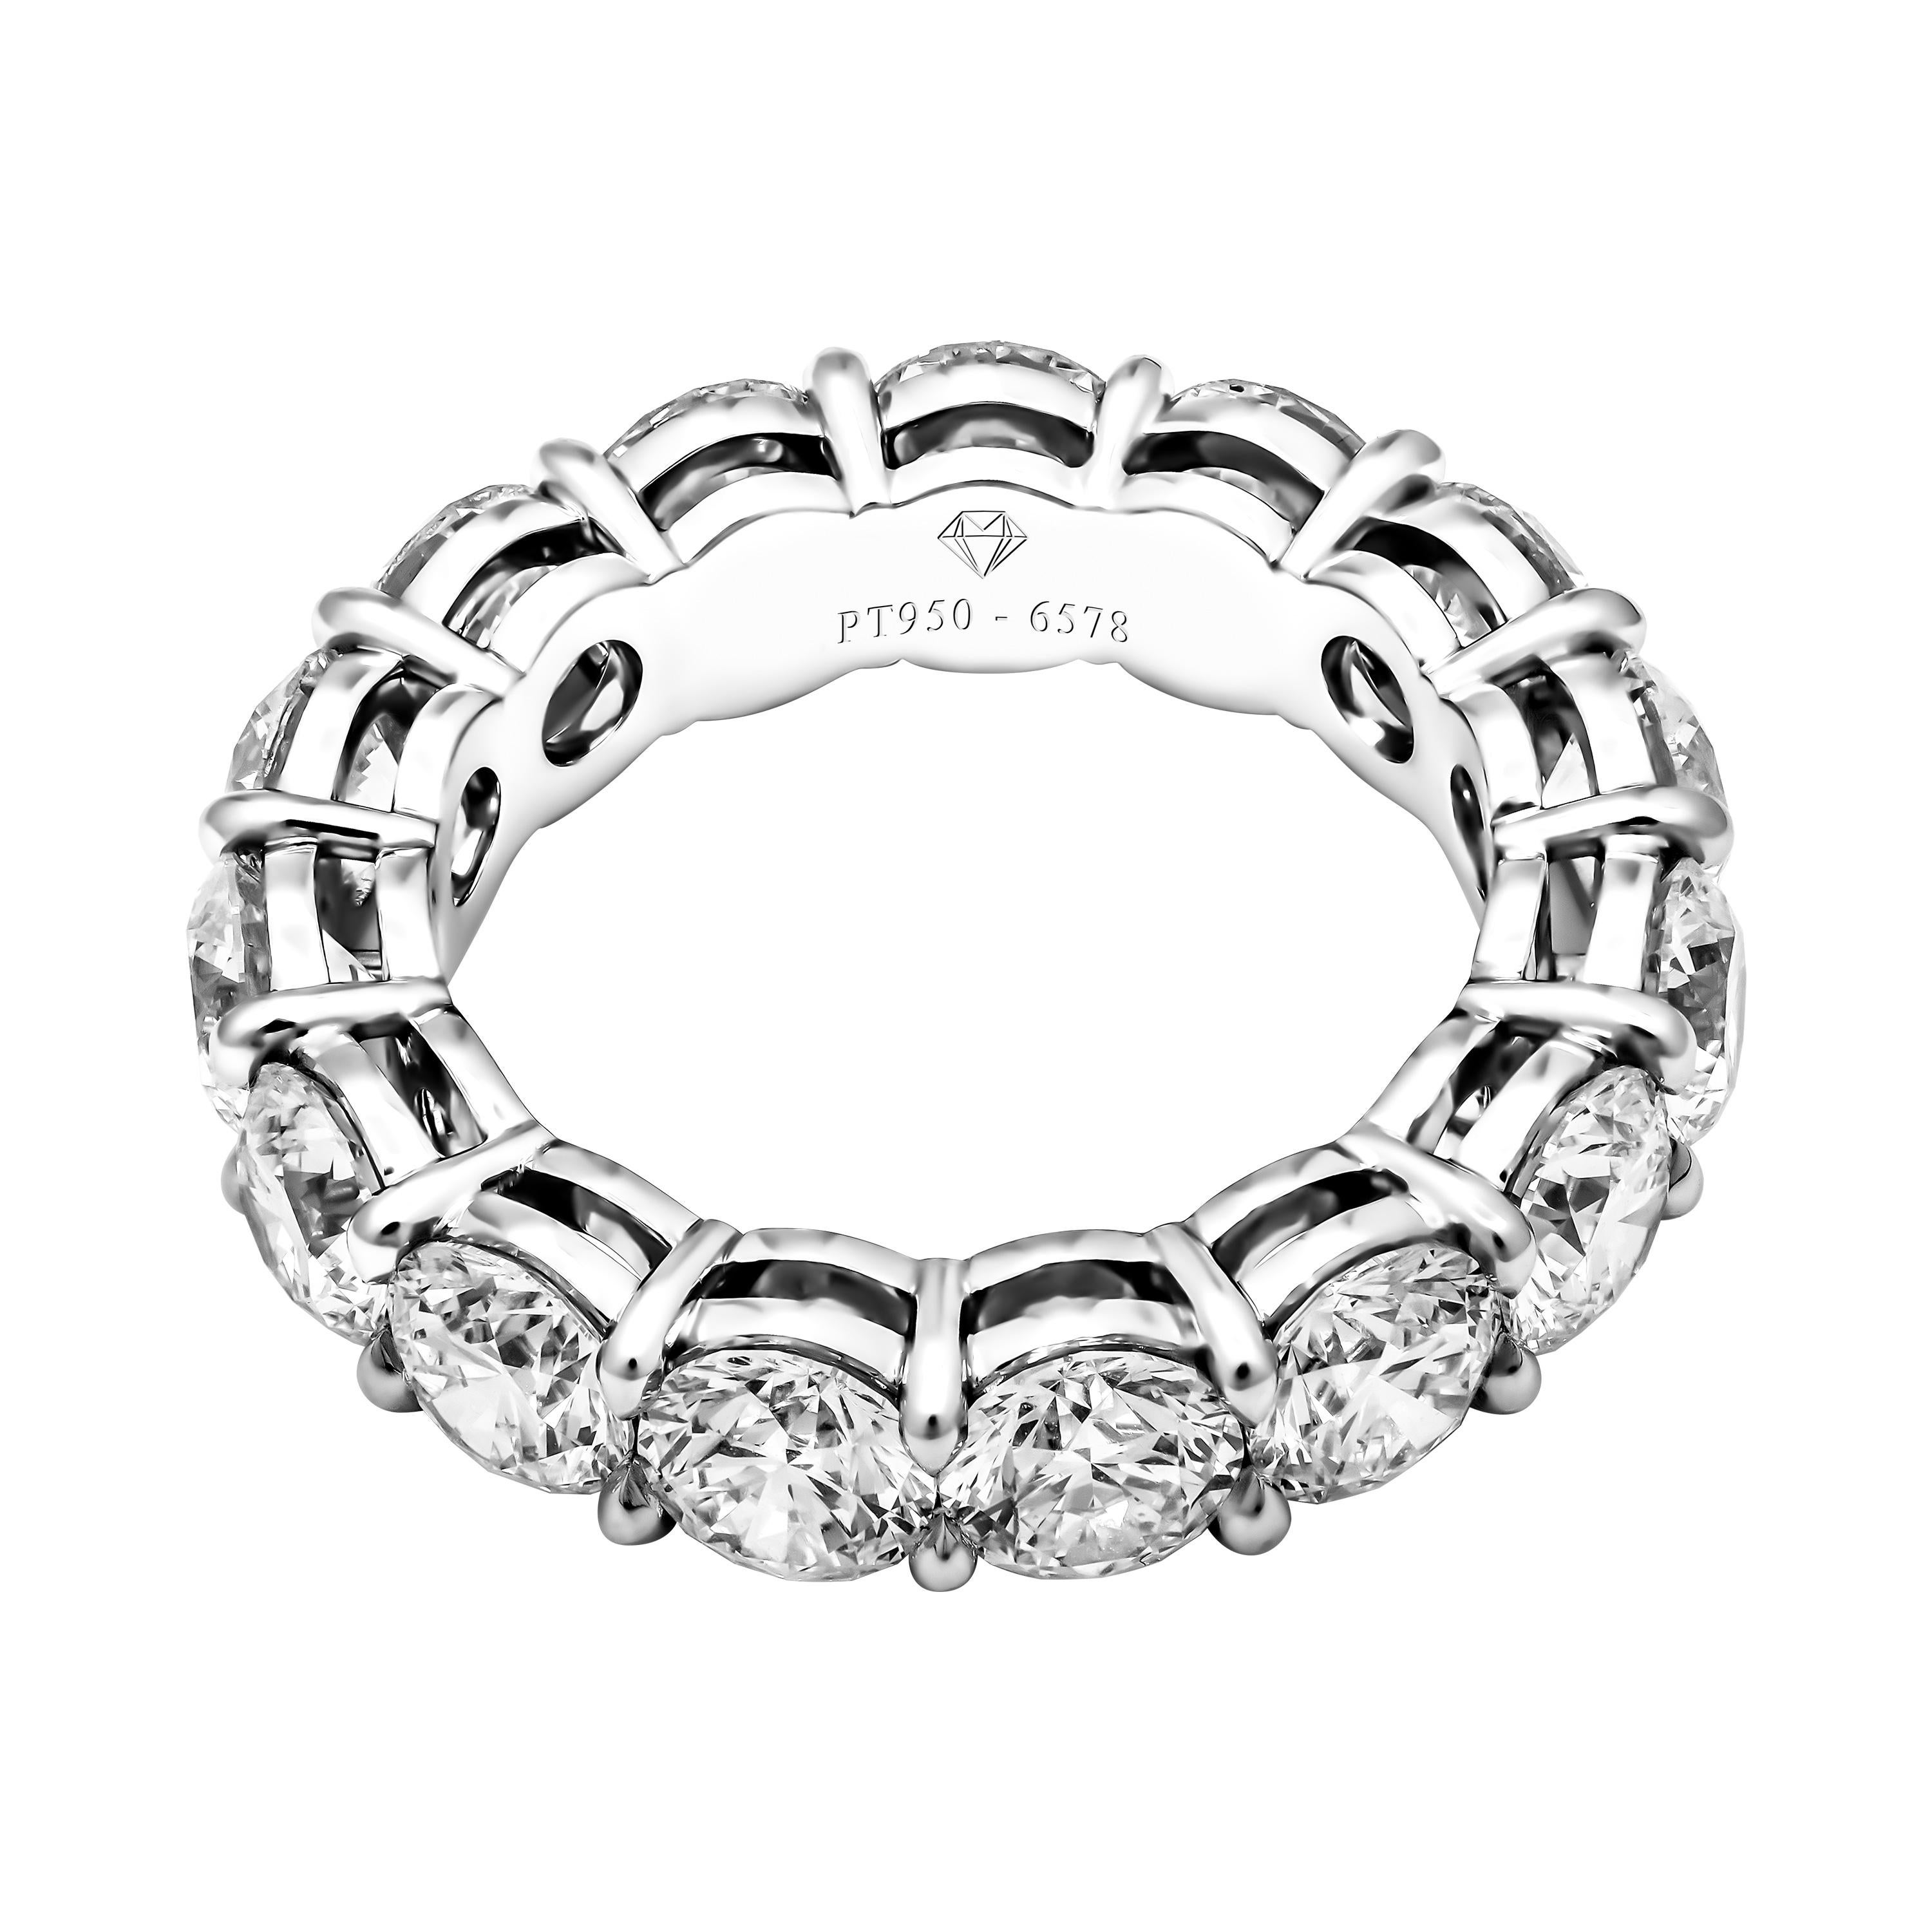 The most wanted piece of jewelry in 2020, timeless, edgy and stylish
Handcrafted Band , the highest quality of mounting you will find! Delicate yet sturdy 
Mounted in Platinum 950, 15 GIA certified Round cut diamonds totaling 6ct total, 0.40ct each